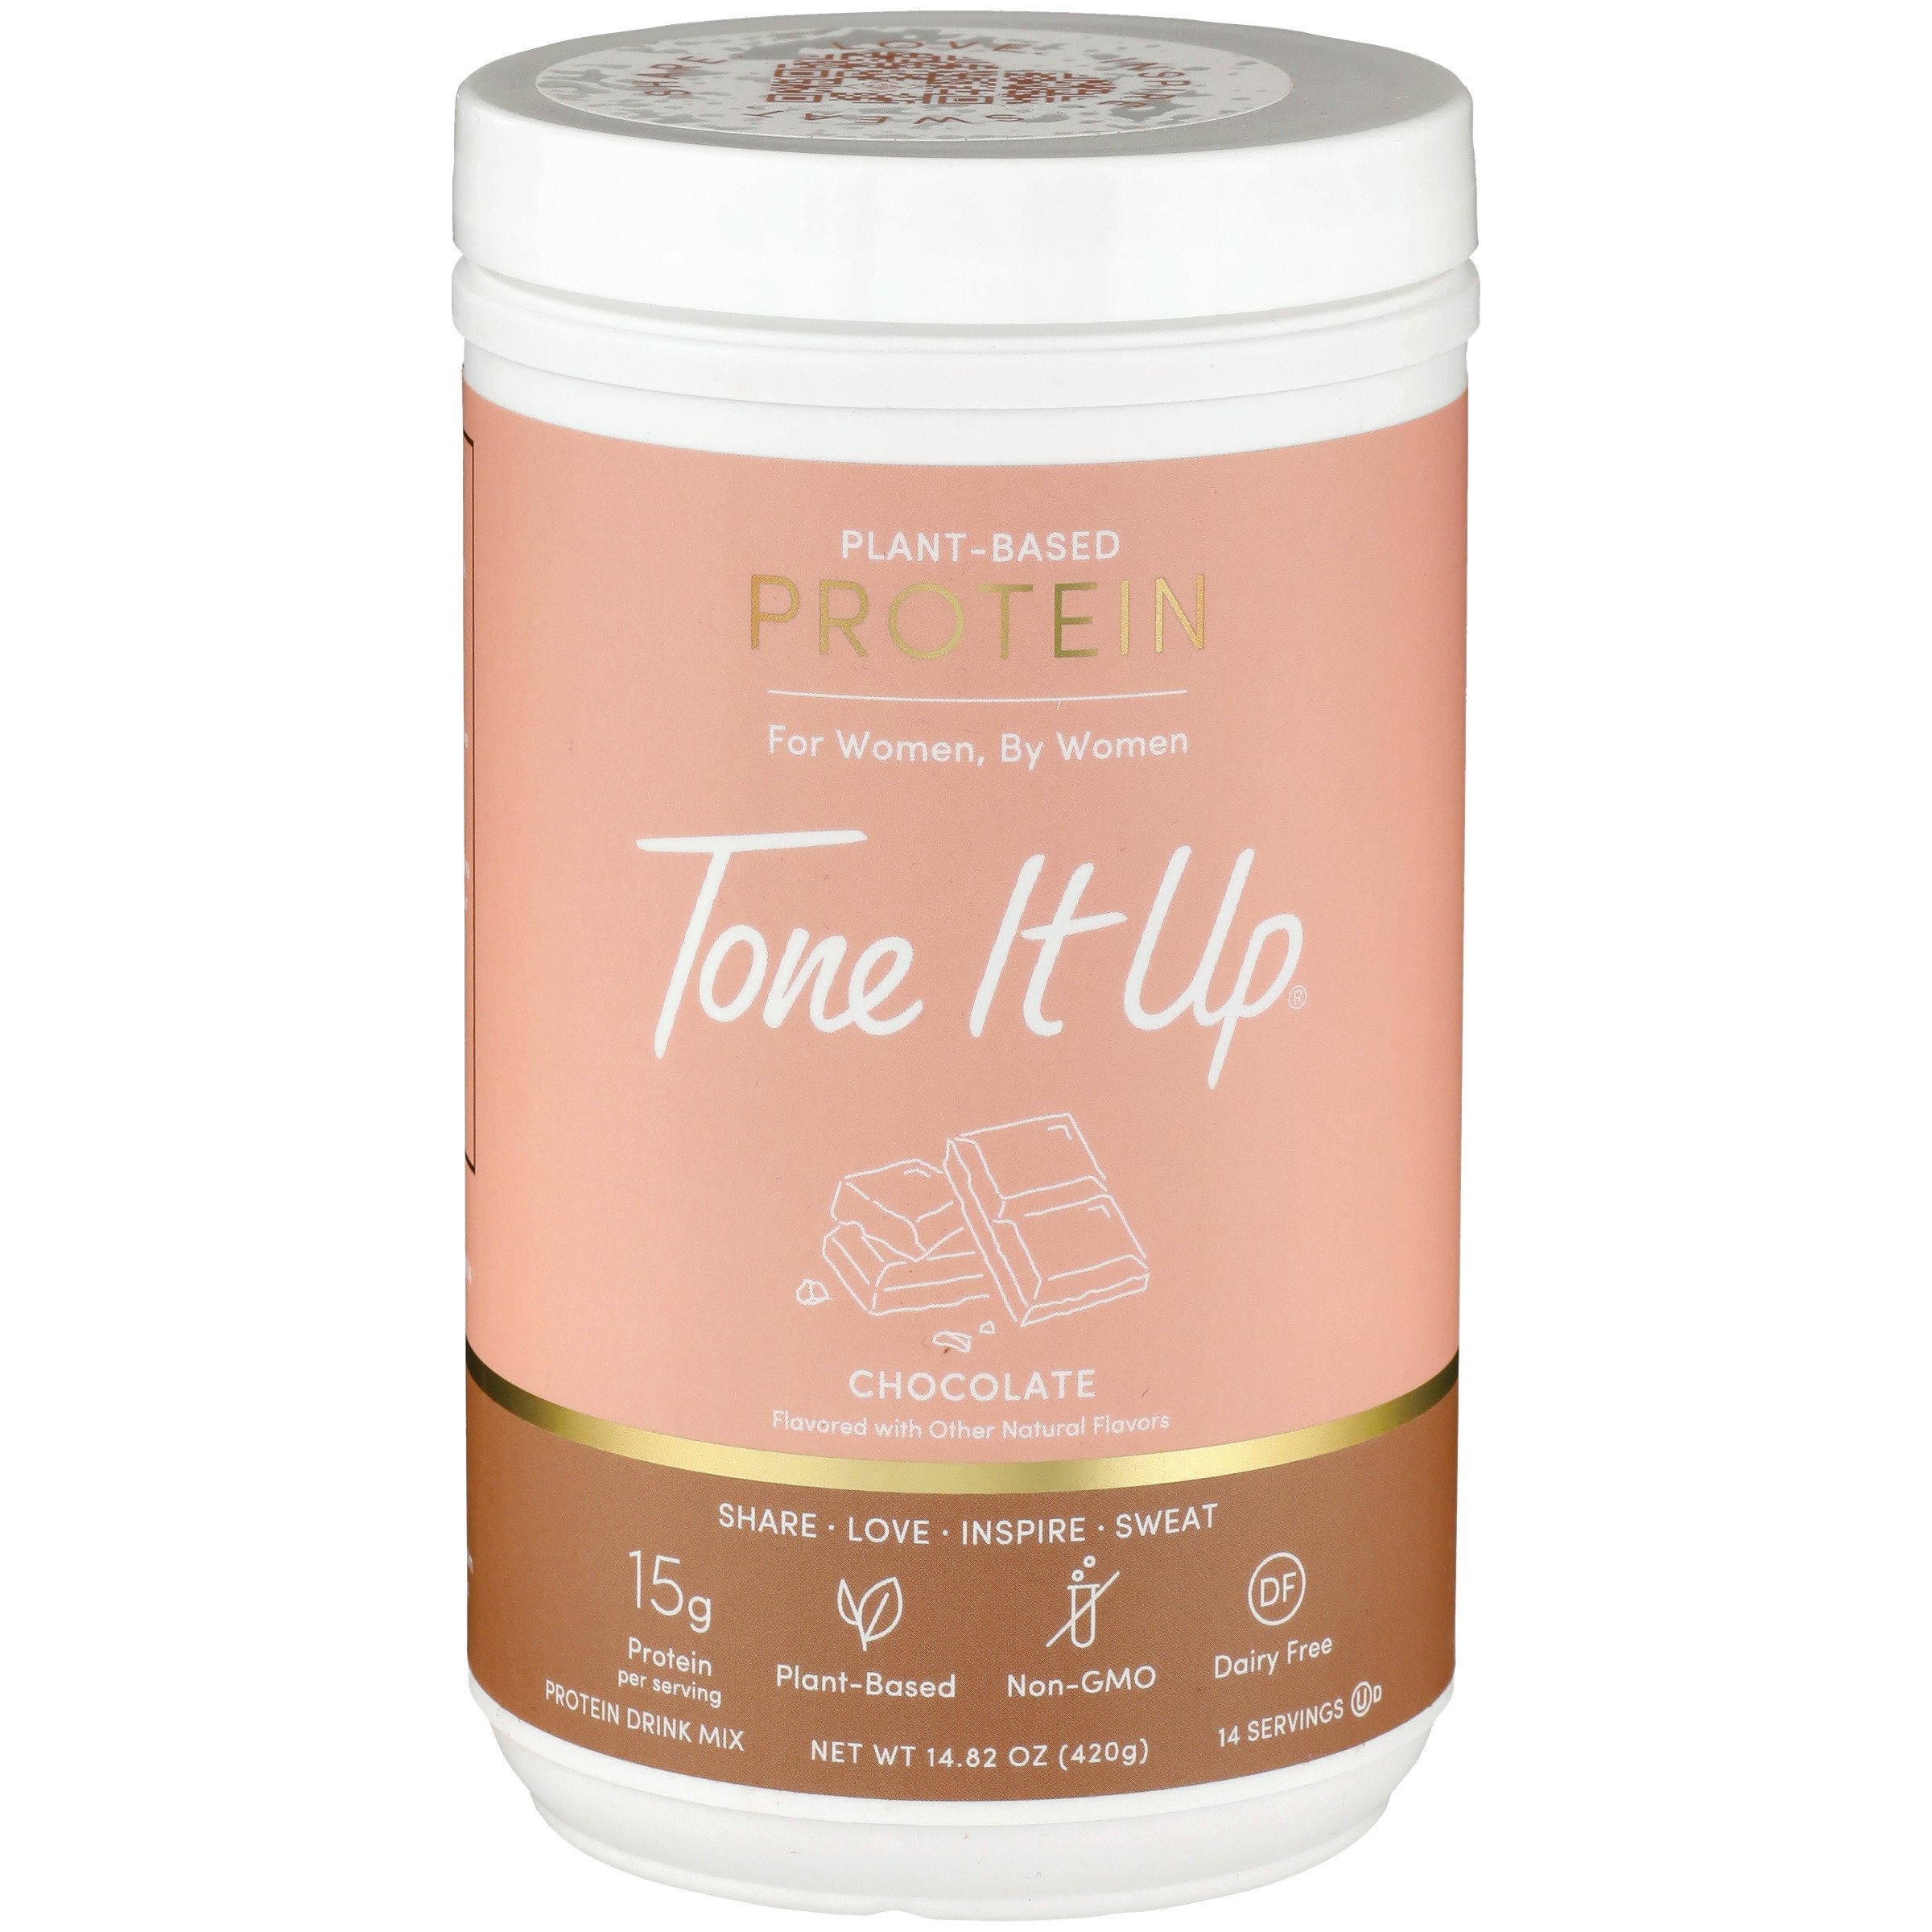 Tone It Up Plant-Based Chocolate Powder - Shop Diet & Fitness at H-E-B